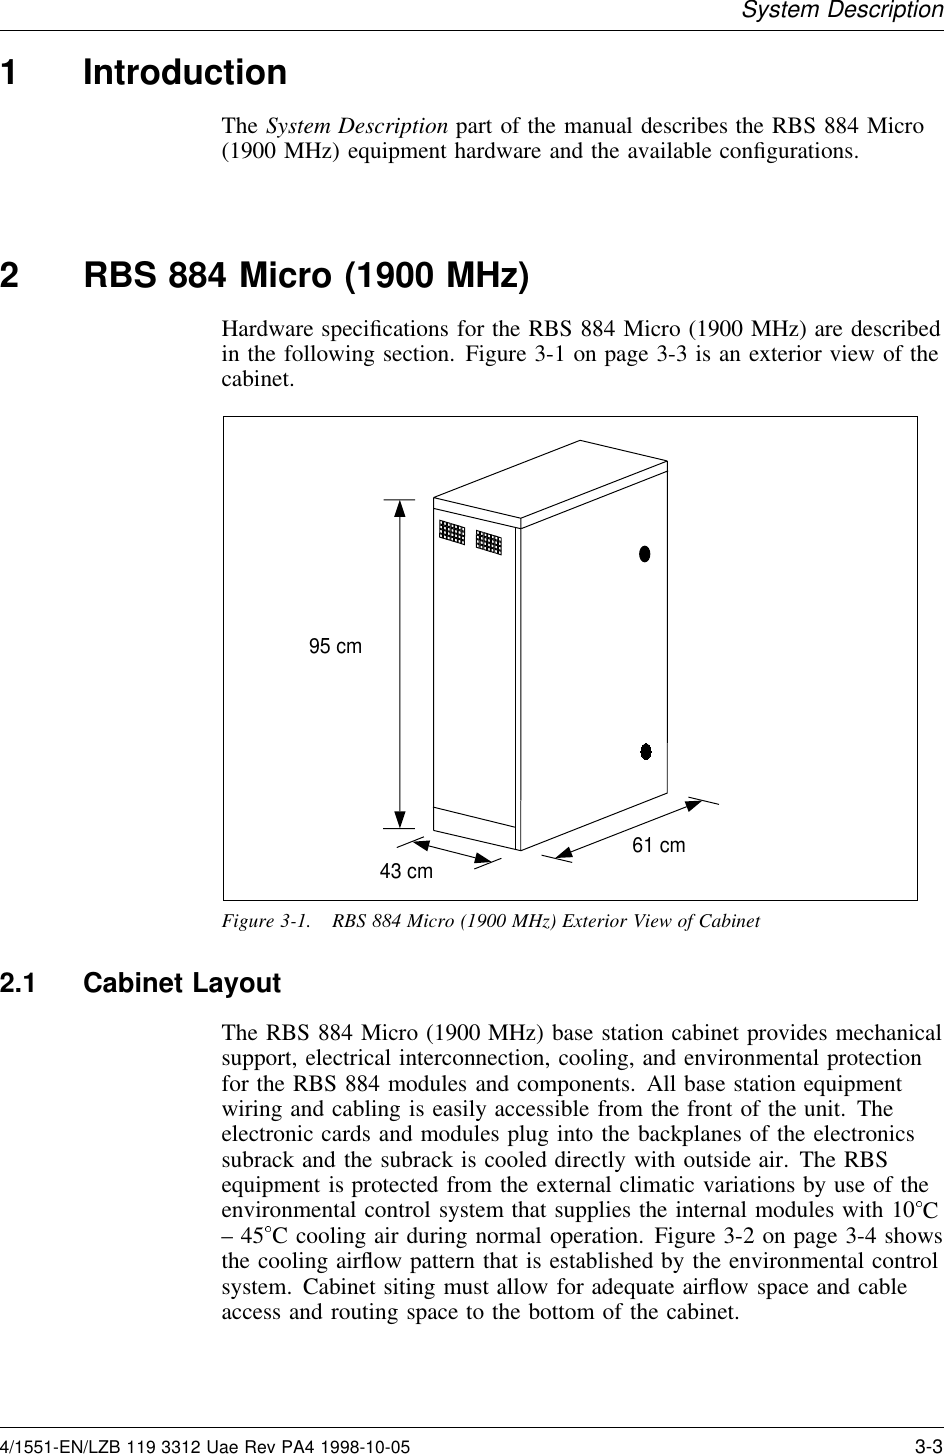 System Description1 IntroductionThe System Description part of the manual describes the RBS 884 Micro(1900 MHz) equipment hardware and the available conﬁgurations.2 RBS 884 Micro (1900 MHz)Hardware speciﬁcations for the RBS 884 Micro (1900 MHz) are describedin the following section. Figure 3-1 on page 3-3 is an exterior view of thecabinet.95 cm43 cm 61 cmFigure 3-1. RBS 884 Micro (1900 MHz) Exterior View of Cabinet2.1 Cabinet LayoutThe RBS 884 Micro (1900 MHz) base station cabinet provides mechanicalsupport, electrical interconnection, cooling, and environmental protectionfor the RBS 884 modules and components. All base station equipmentwiring and cabling is easily accessible from the front of the unit. Theelectronic cards and modules plug into the backplanes of the electronicssubrack and the subrack is cooled directly with outside air. The RBSequipment is protected from the external climatic variations by use of theenvironmental control system that supplies the internal modules with 10 C–45C cooling air during normal operation. Figure 3-2 on page 3-4 showsthe cooling airﬂow pattern that is established by the environmental controlsystem. Cabinet siting must allow for adequate airﬂow space and cableaccess and routing space to the bottom of the cabinet.4/1551-EN/LZB 119 3312 Uae Rev PA4 1998-10-05 3-3